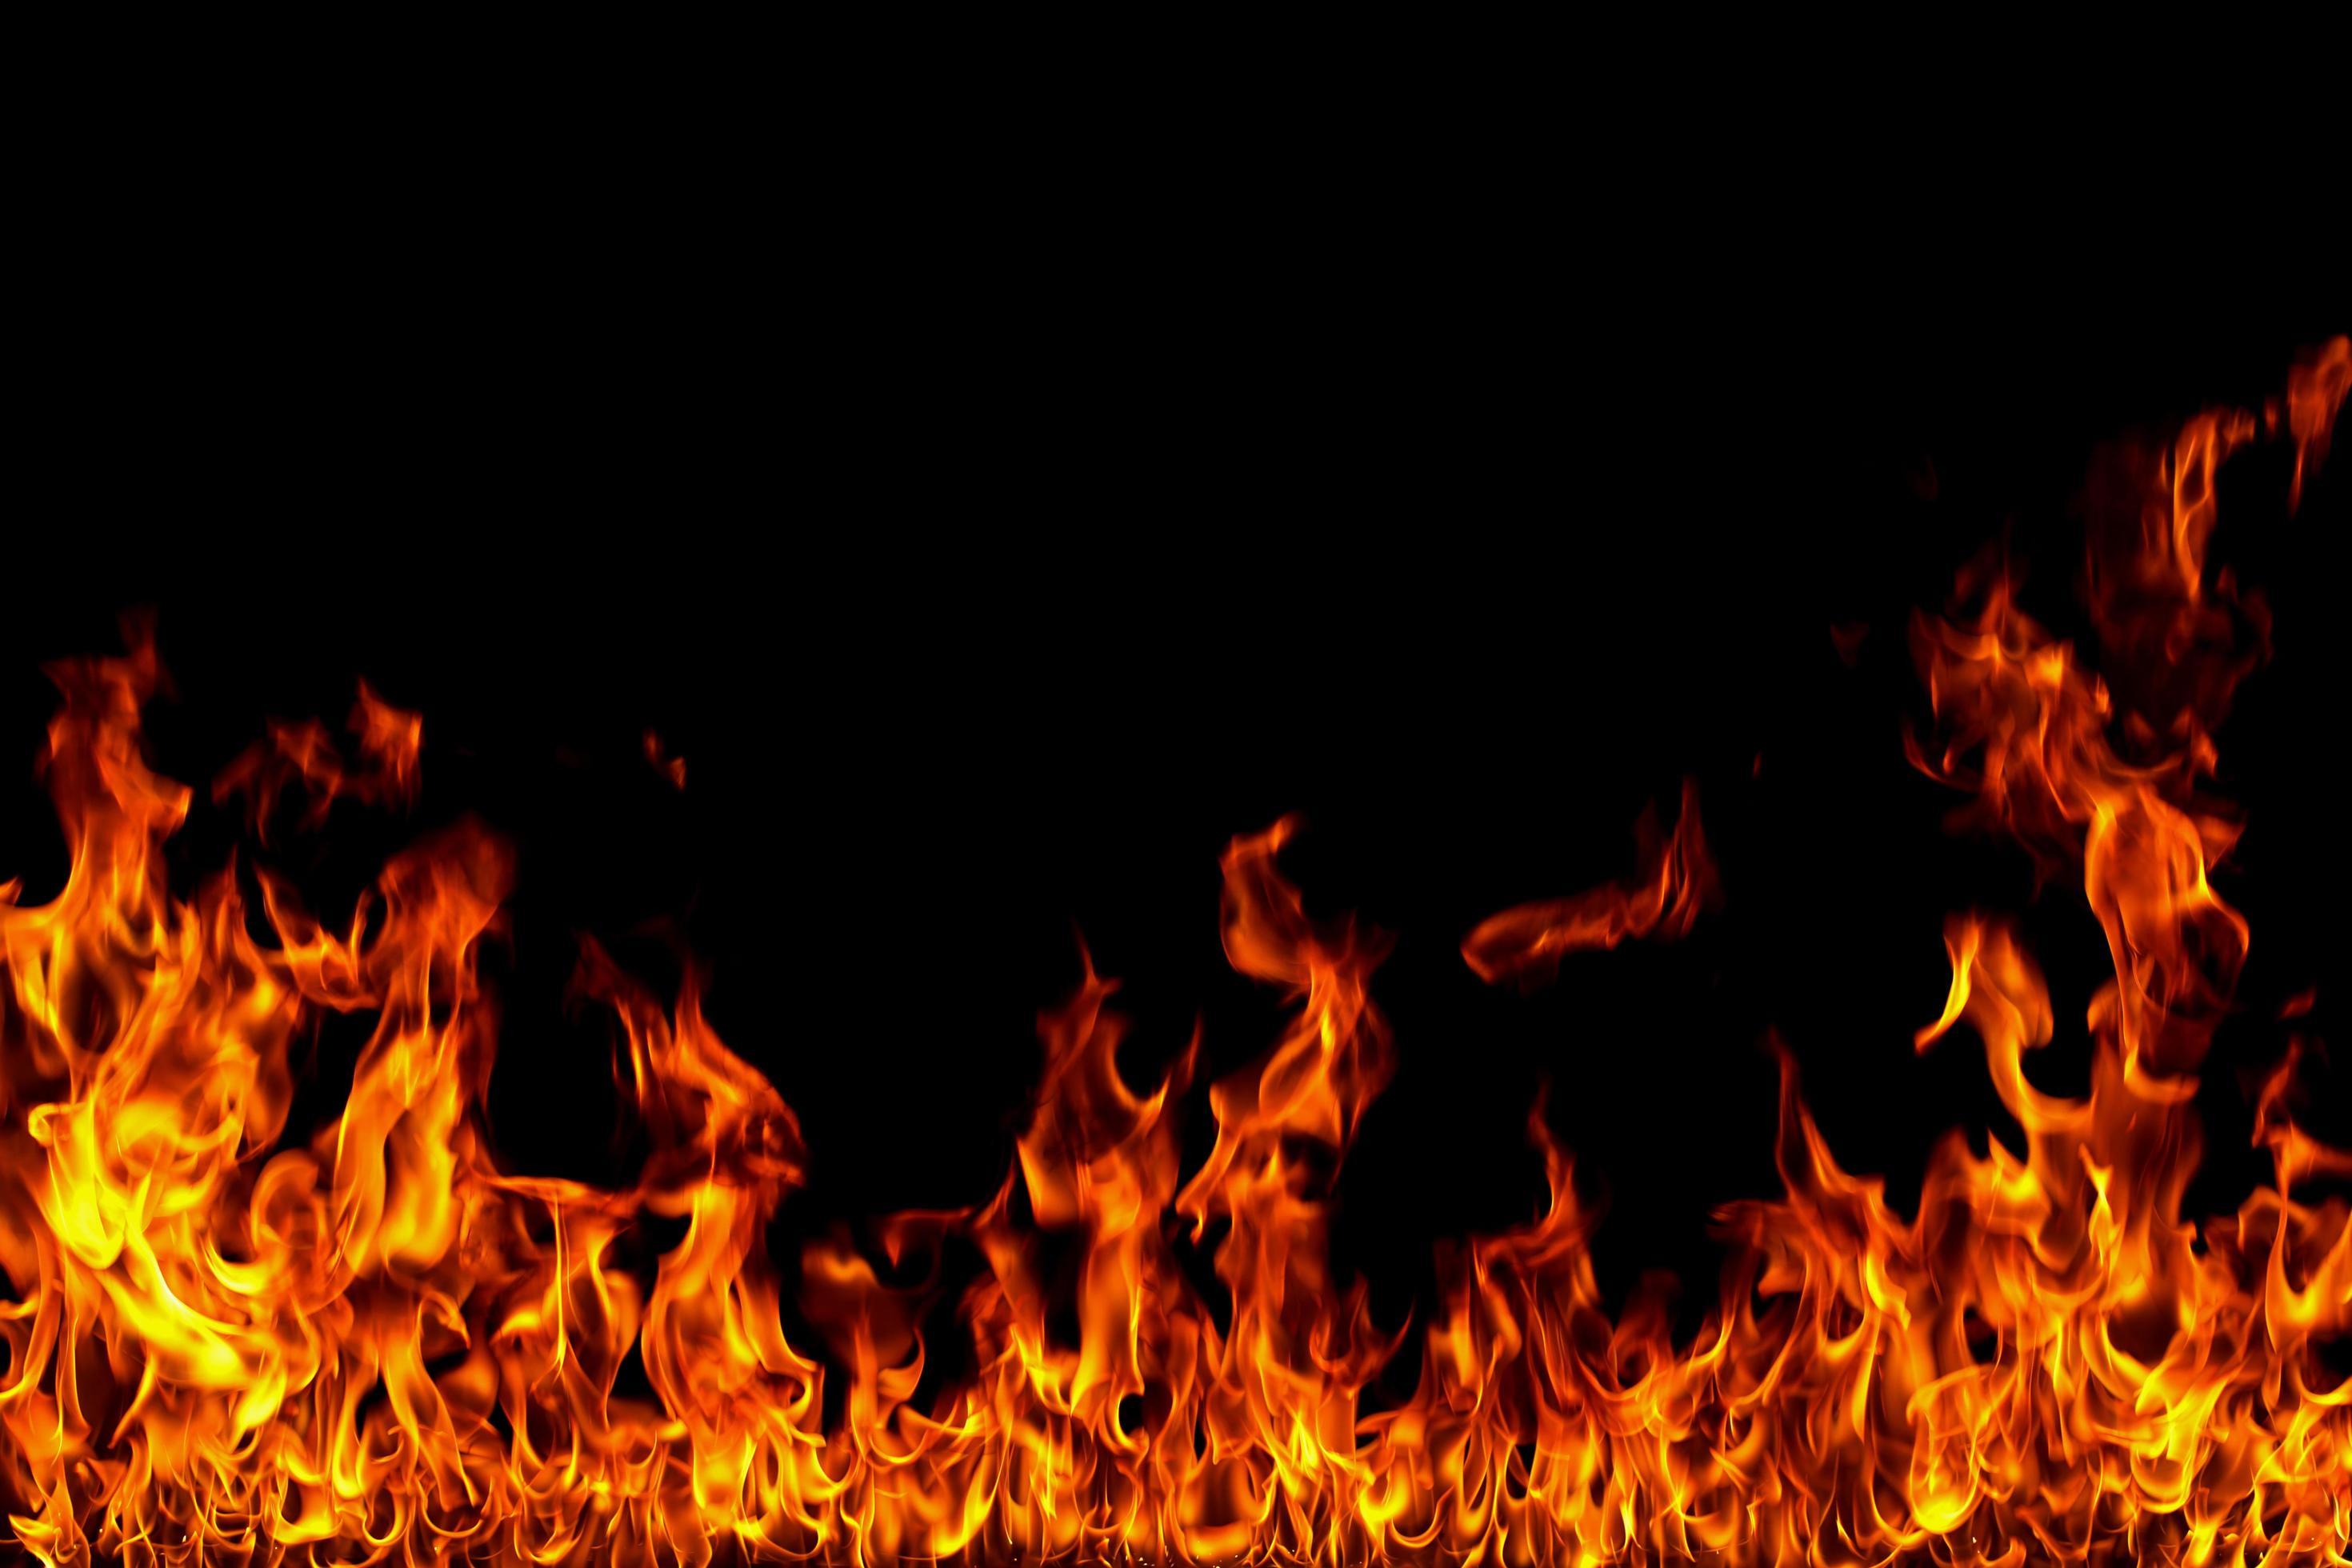 Fire Flames On Black Background 6893497 Stock Photo At Vecteezy